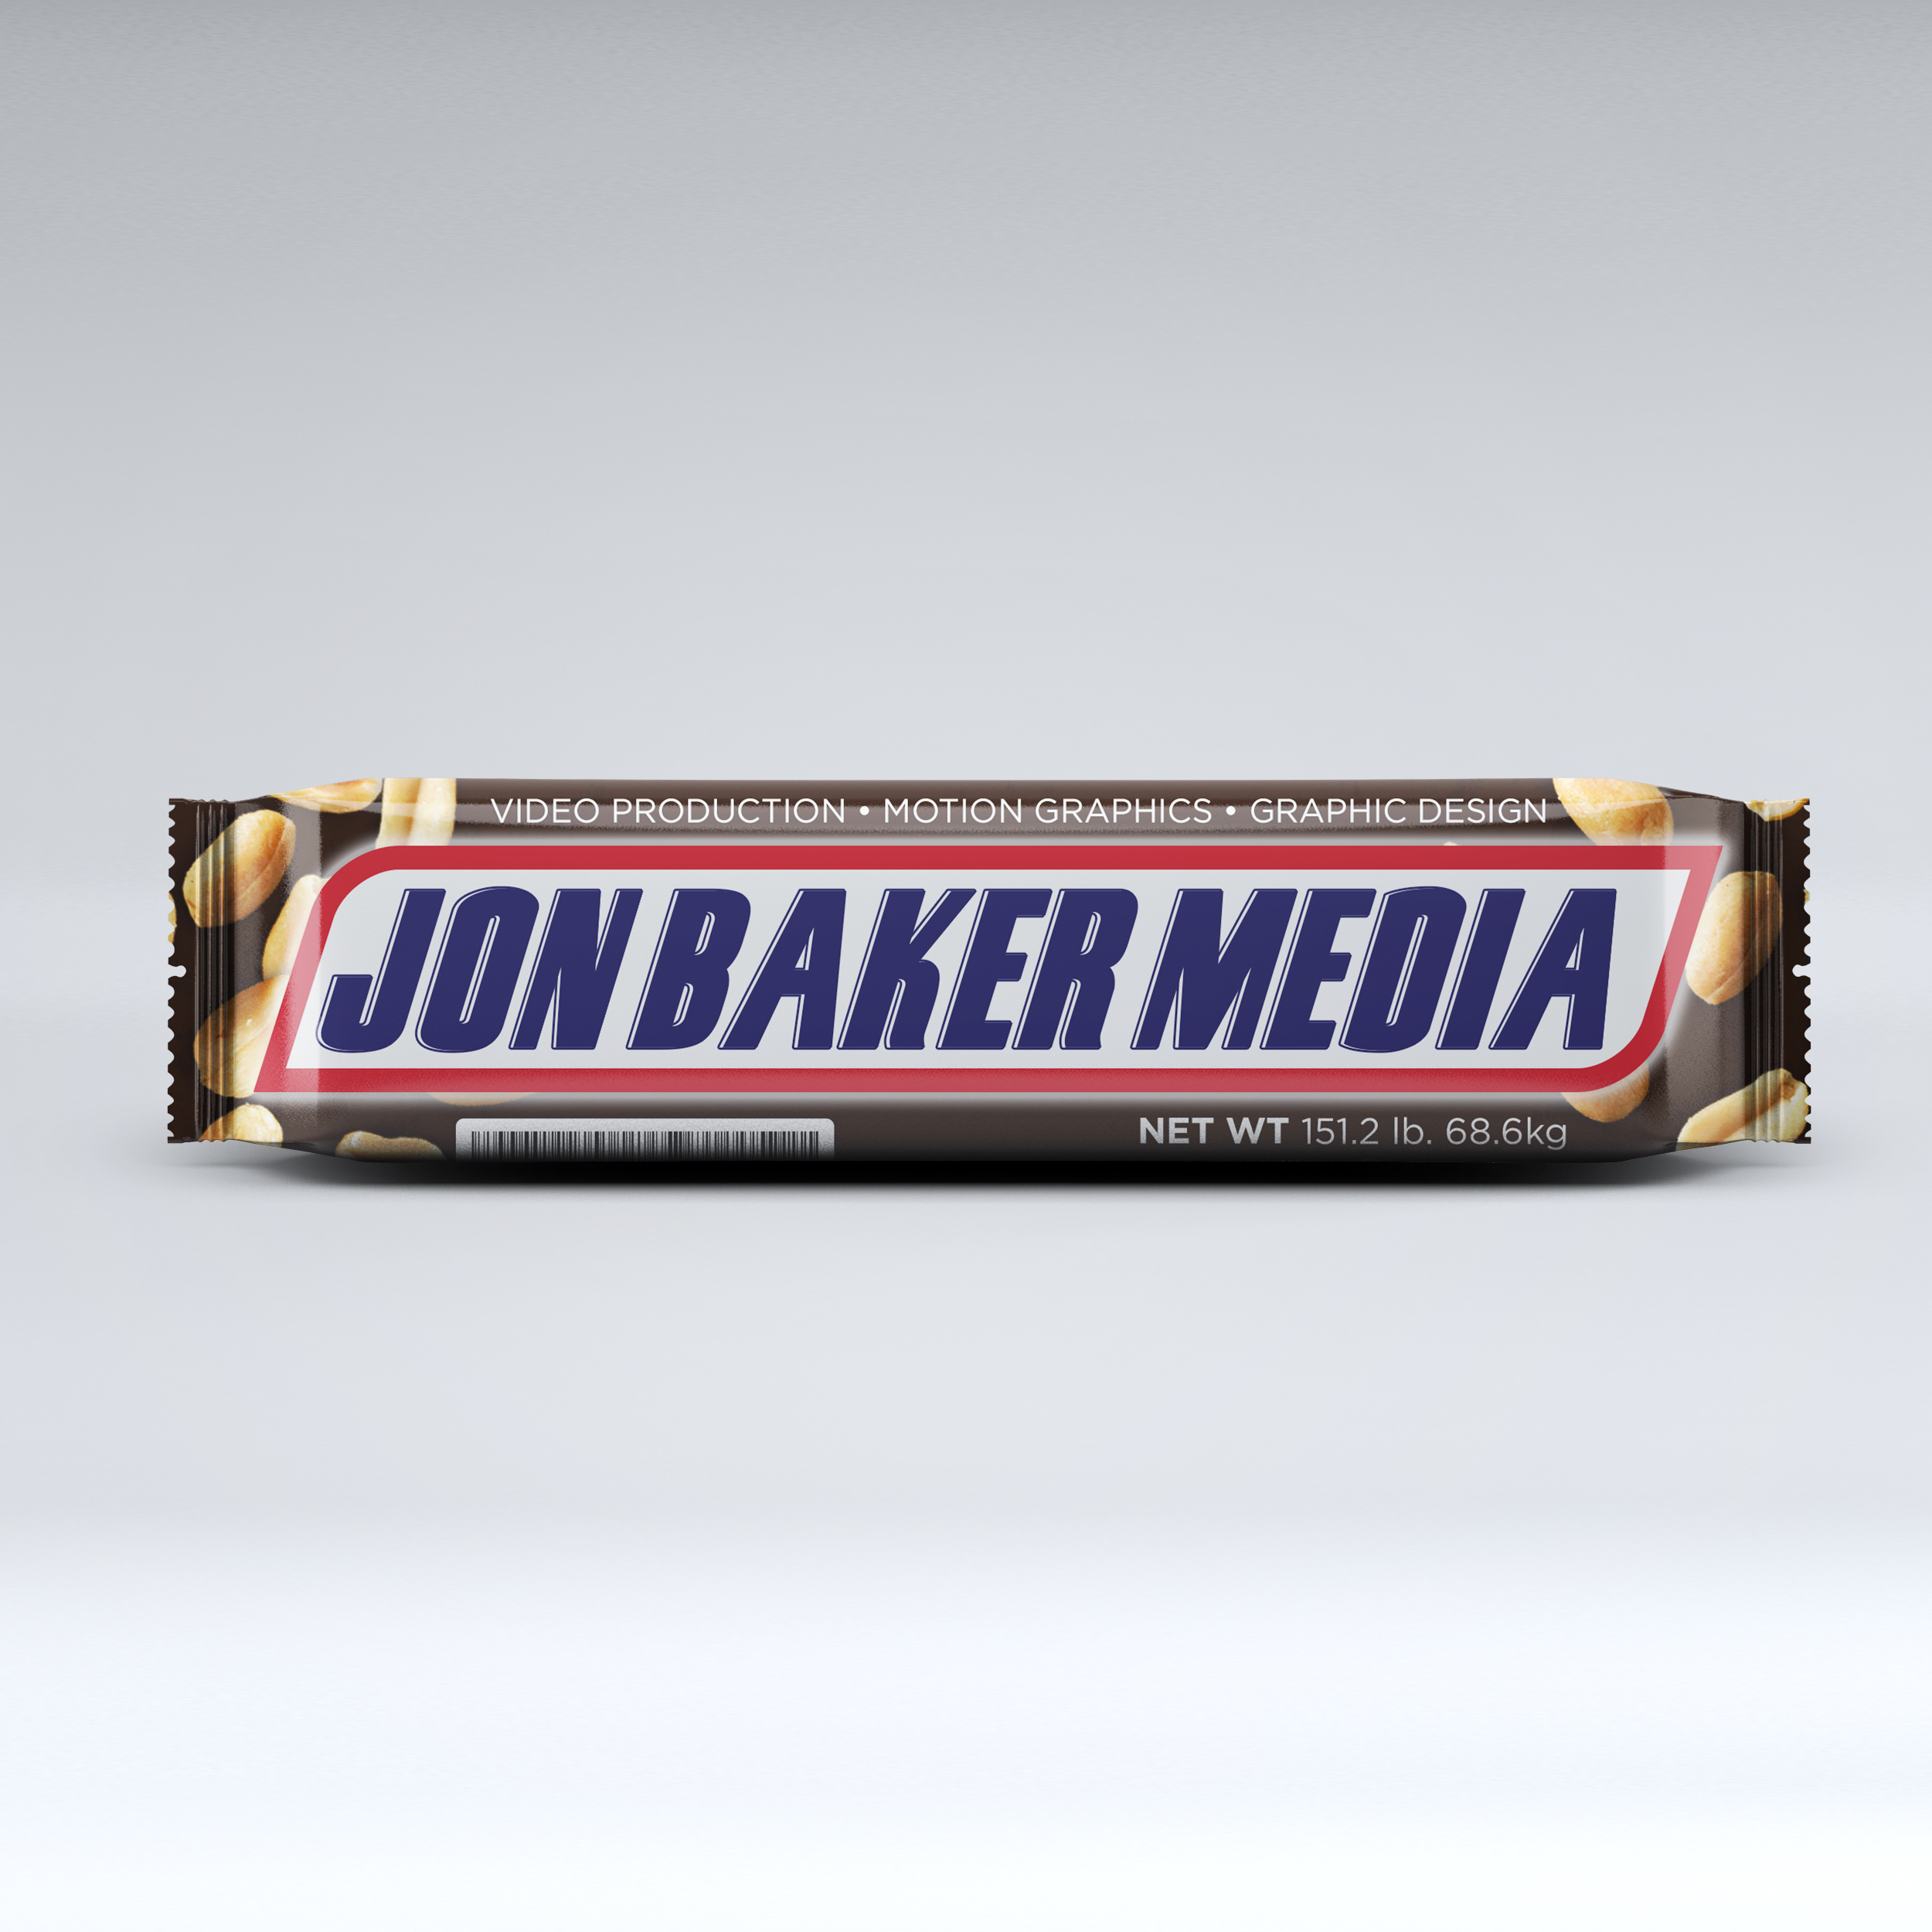 Jon Baker Media, with caramel, peanuts, and nougat covered in Chocolate.